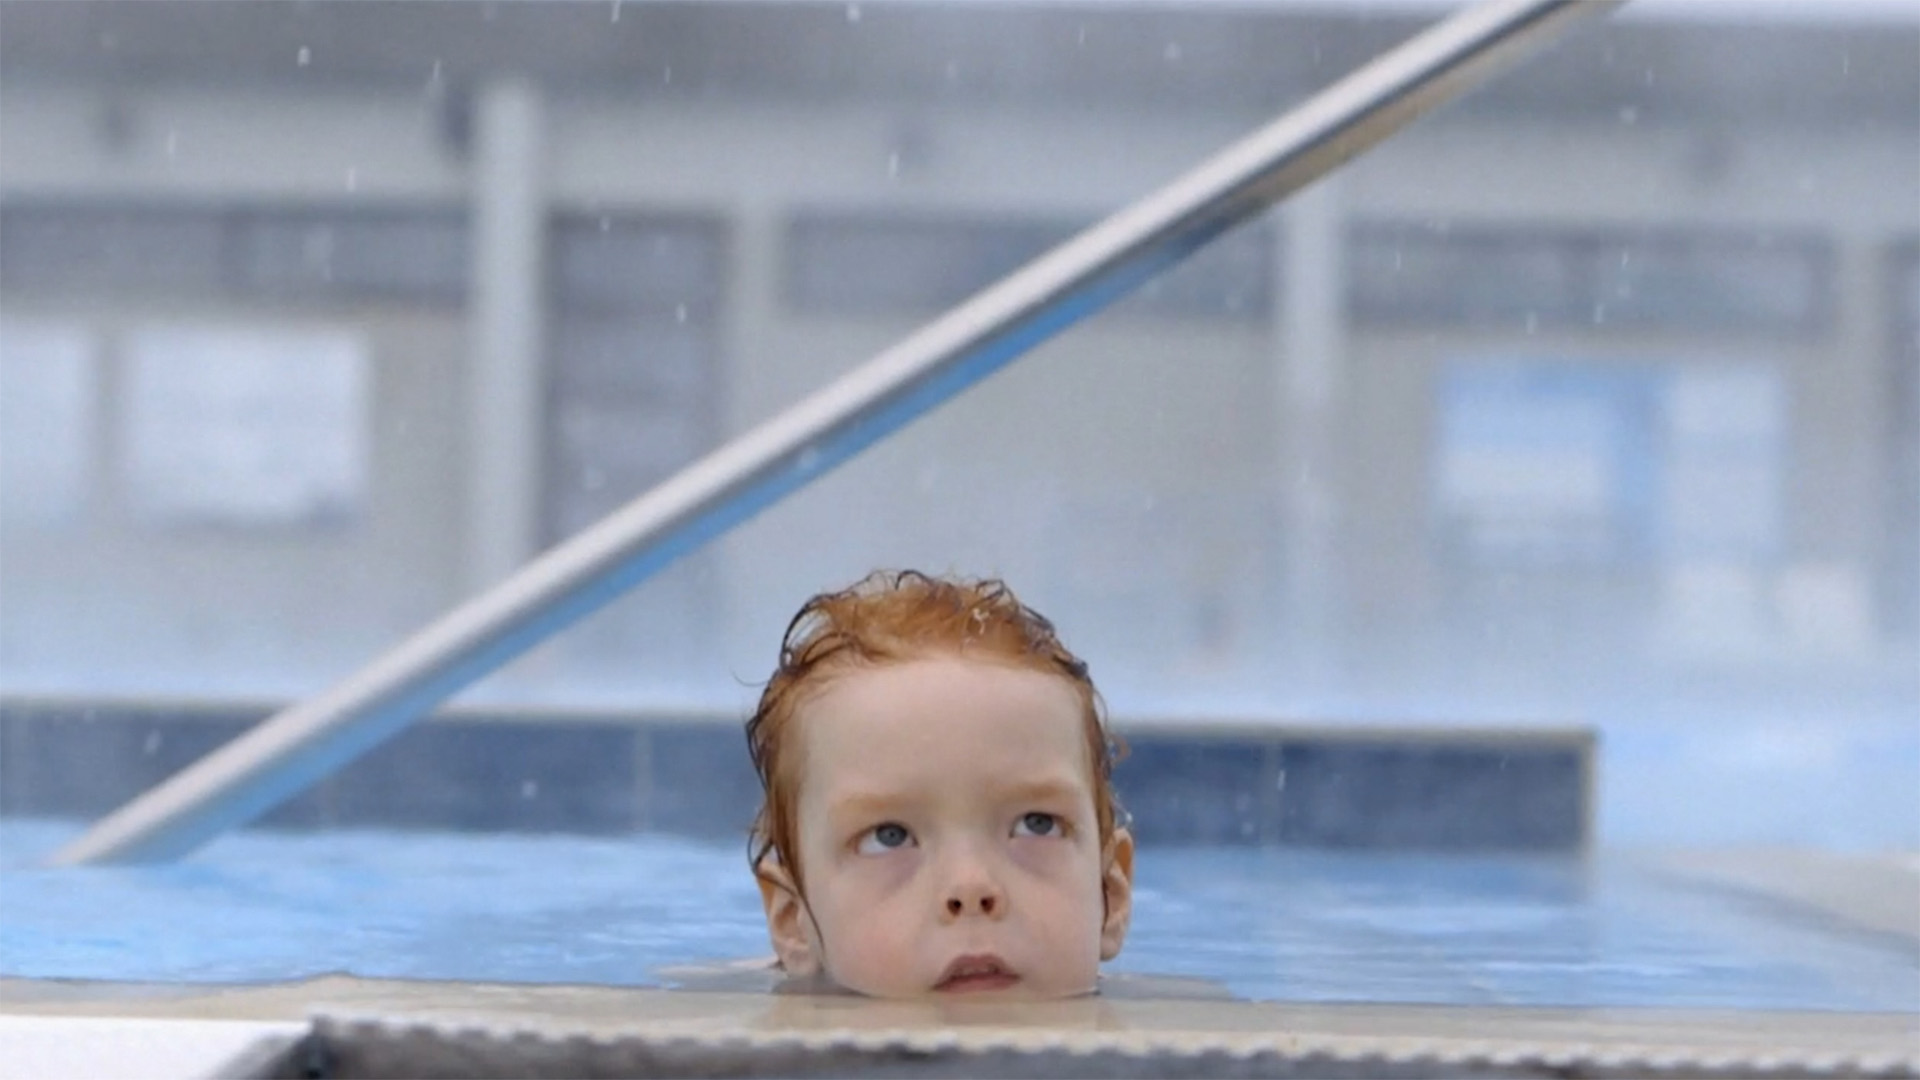 A young boy with orange hair sticks his head out of a heated pool as snow falls.